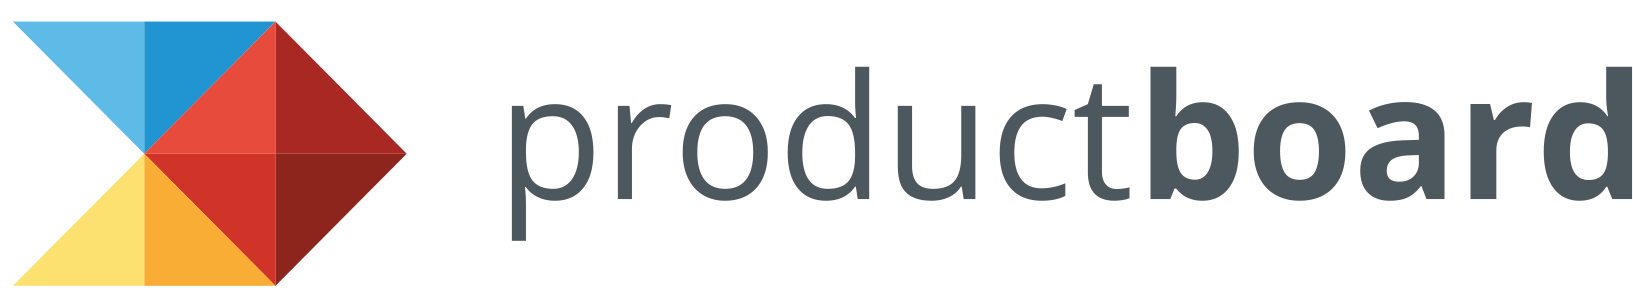 Productboard - automation tool for remote teams